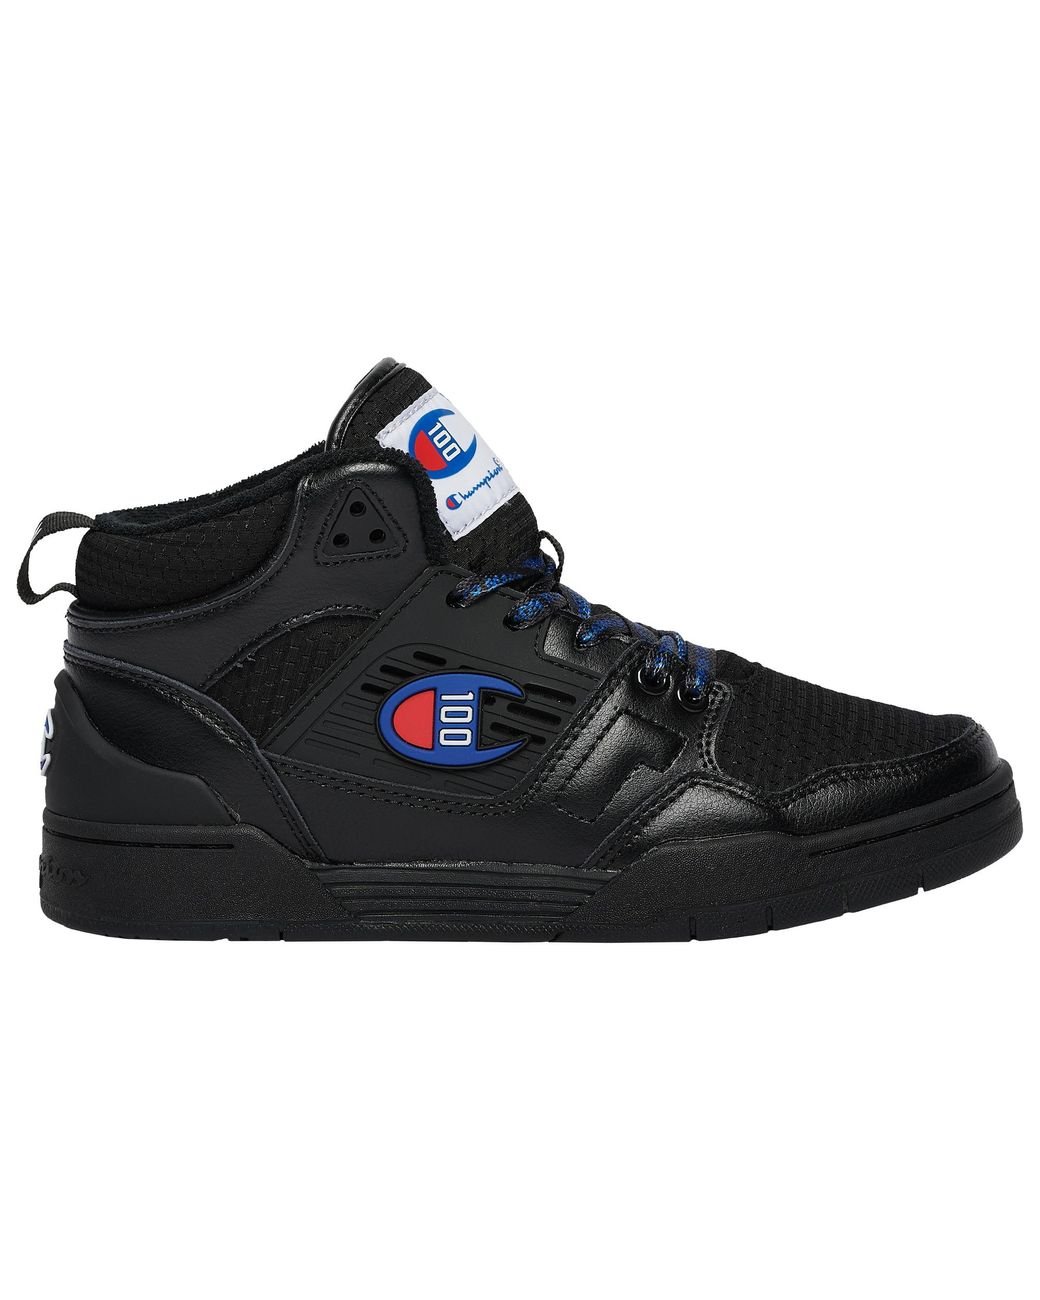 Champion Leather 3 On 3 100 Basketball Shoes in Black/Blue Red (Black ...